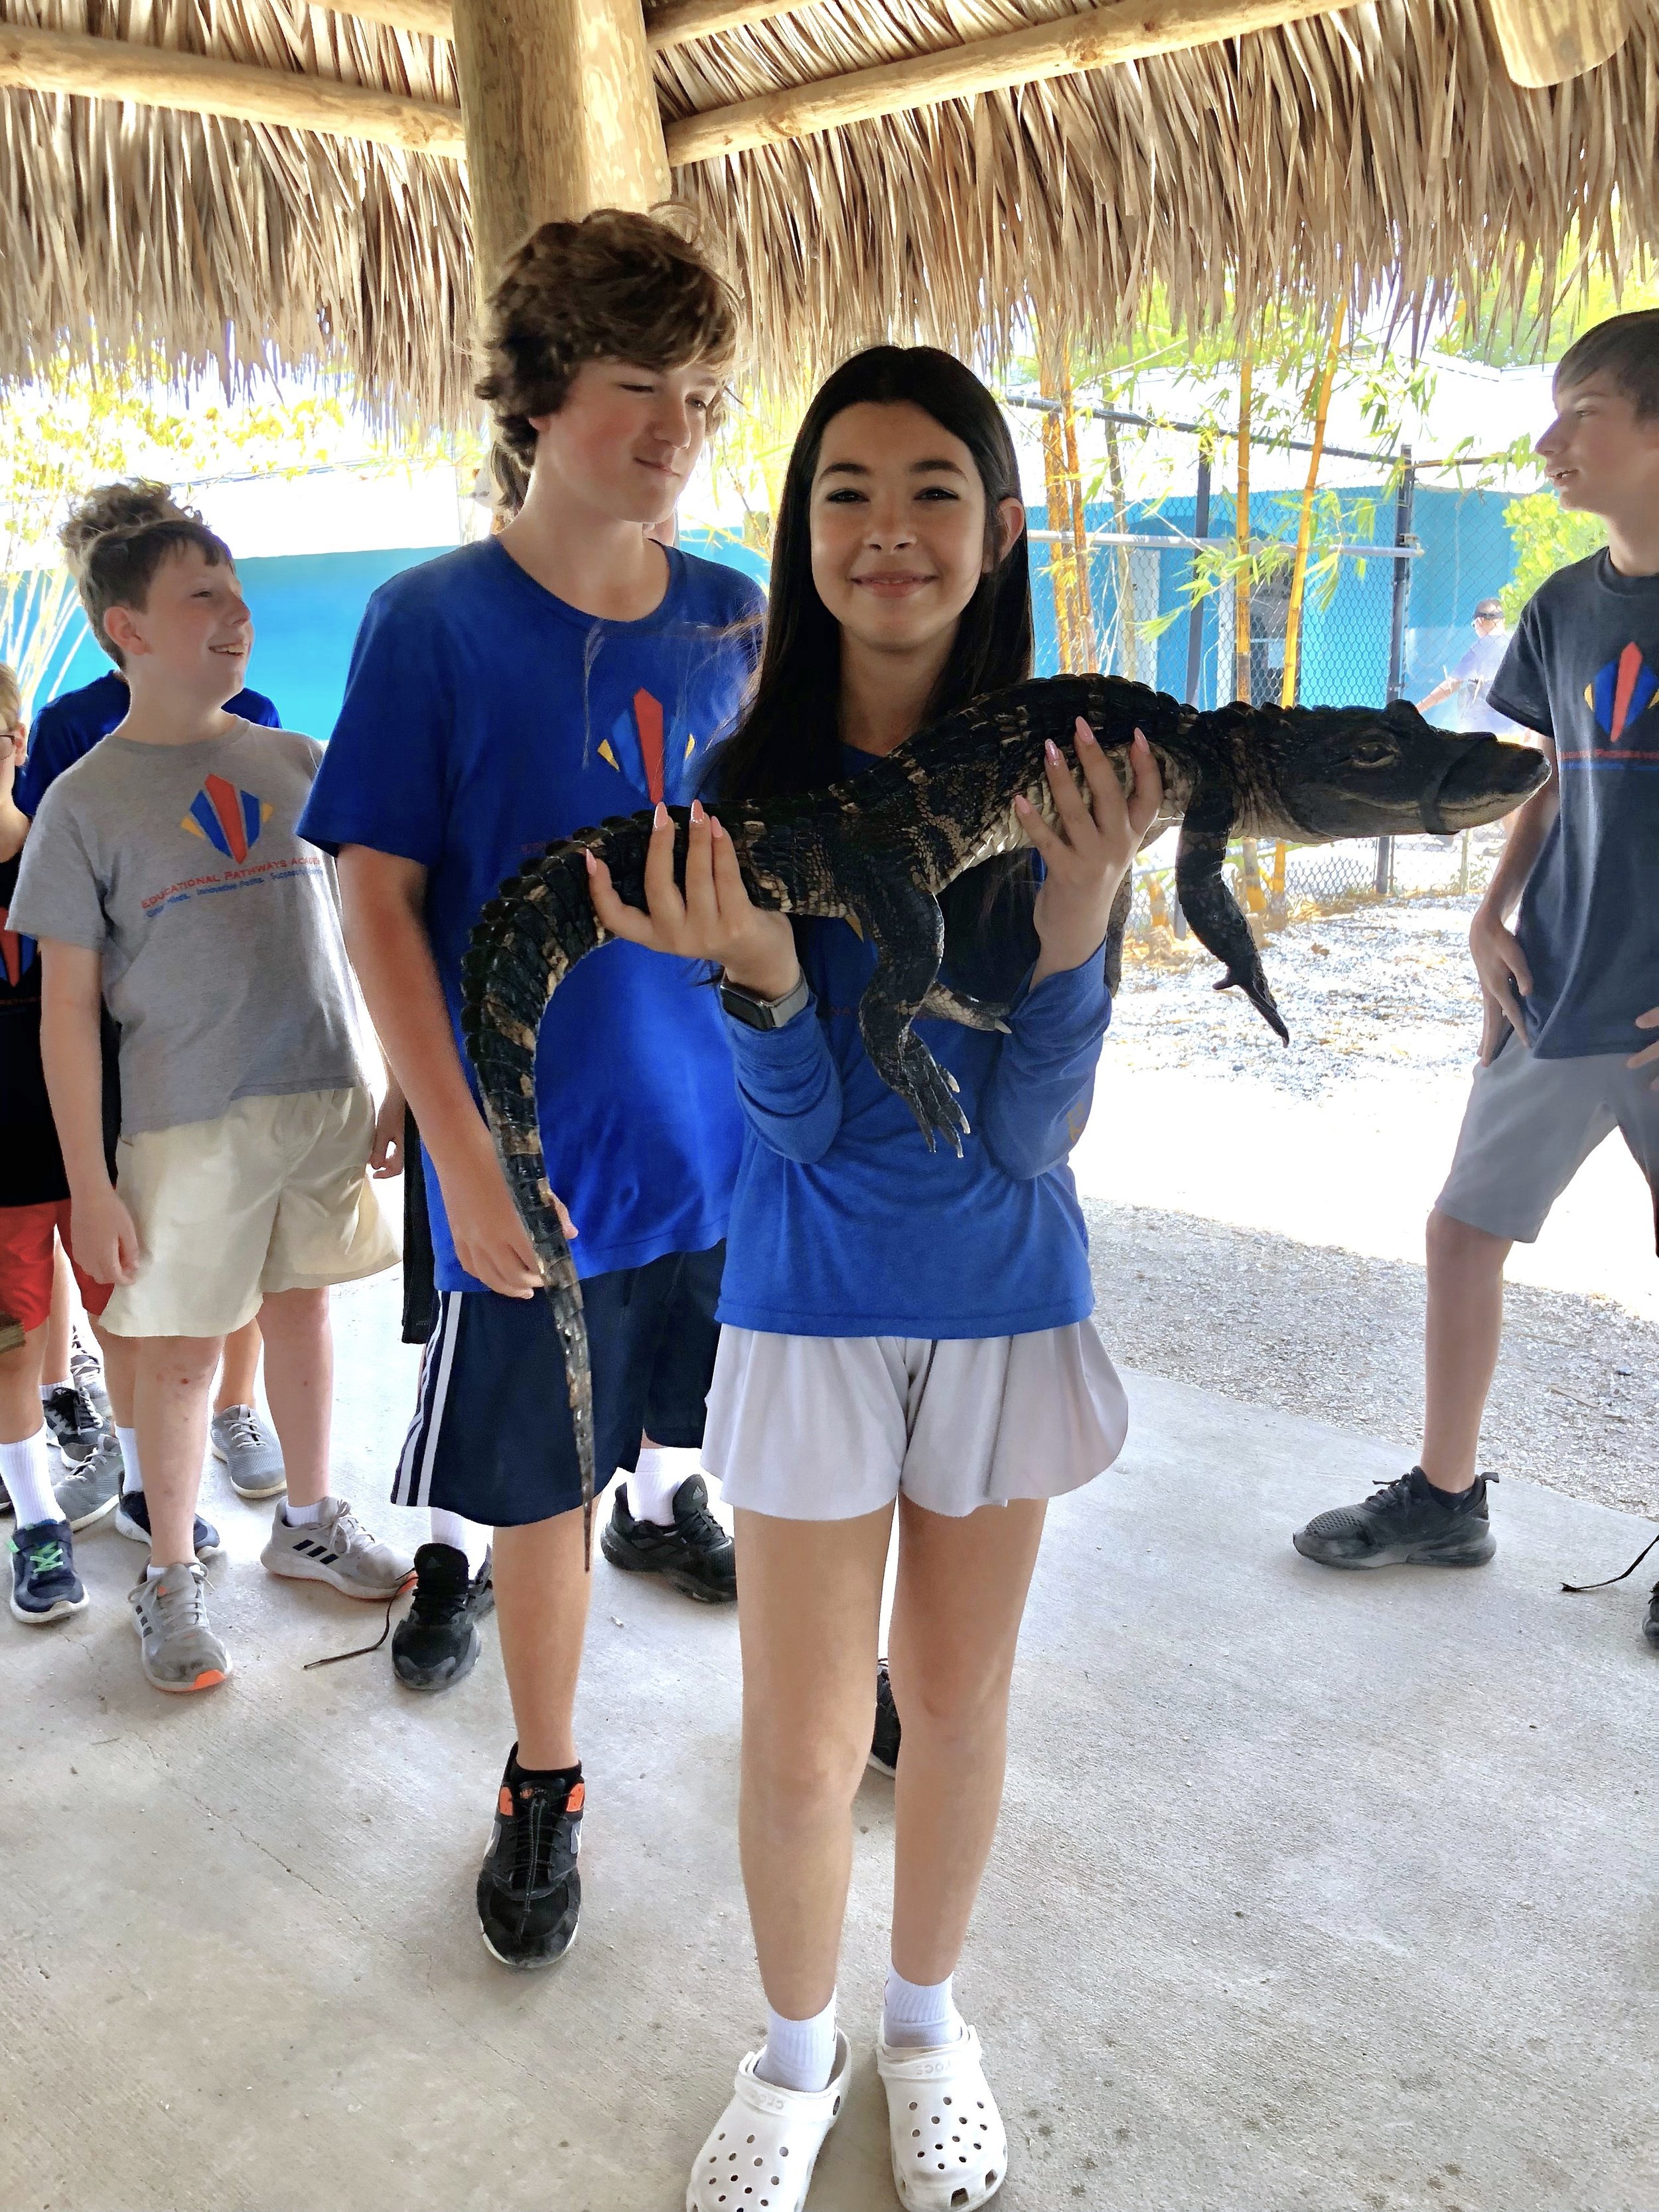 Middle School students enjoy experiential tour of the Everglades on field trip with Wooten’s Everglades Airboat Tours - Educational Pathways Academy, private school for dyslexia in Florida.jpg